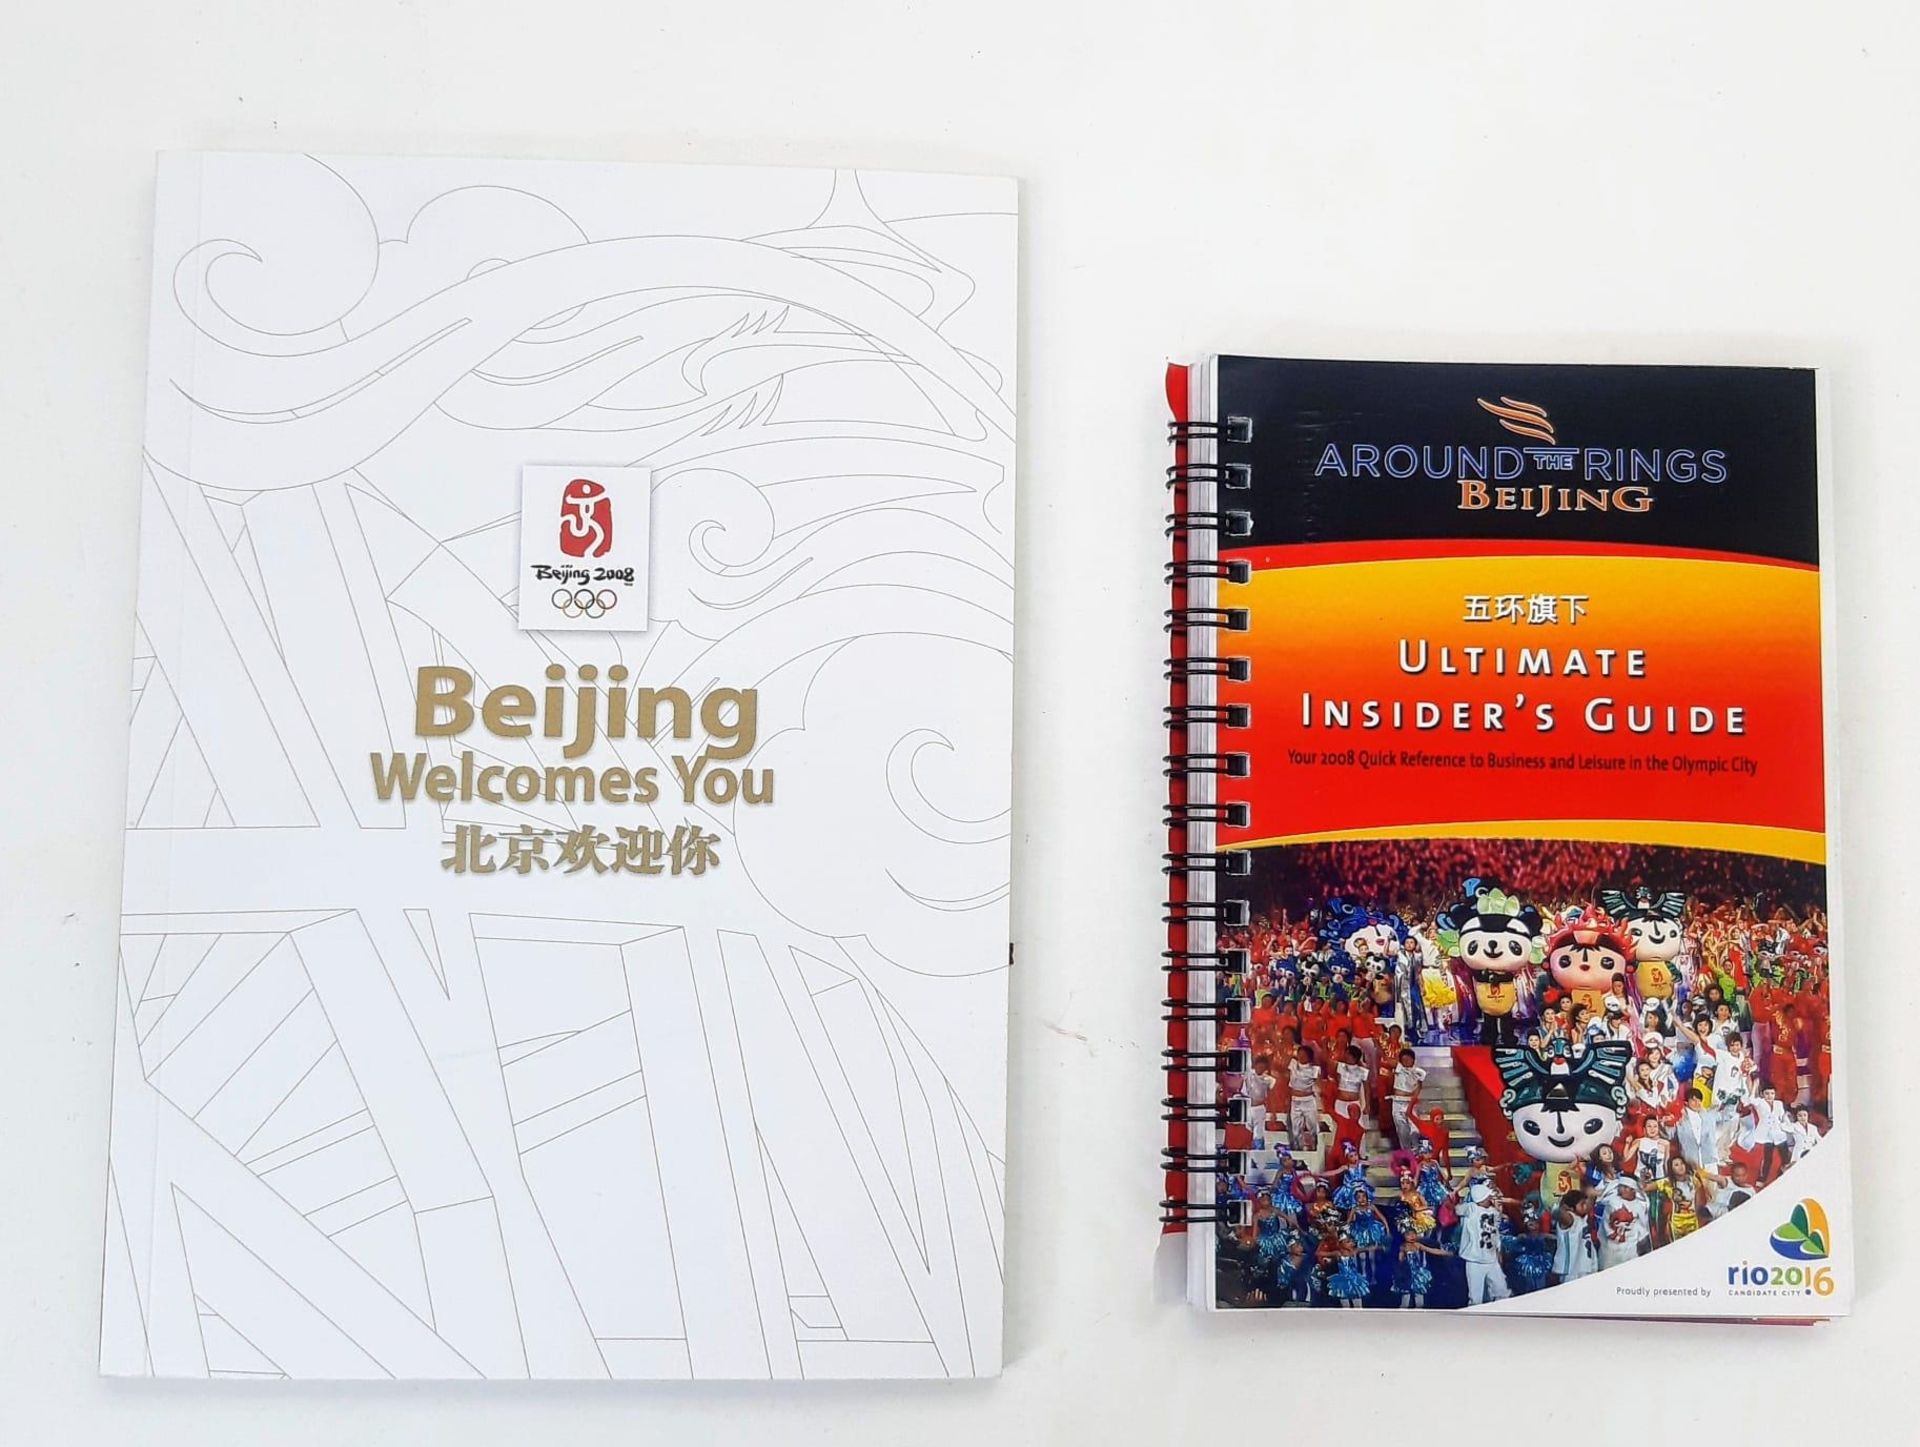 A Beijing 2008 Olympics Press/Media Pack. Includes tickets, brochures and other collectibles. - Image 7 of 12